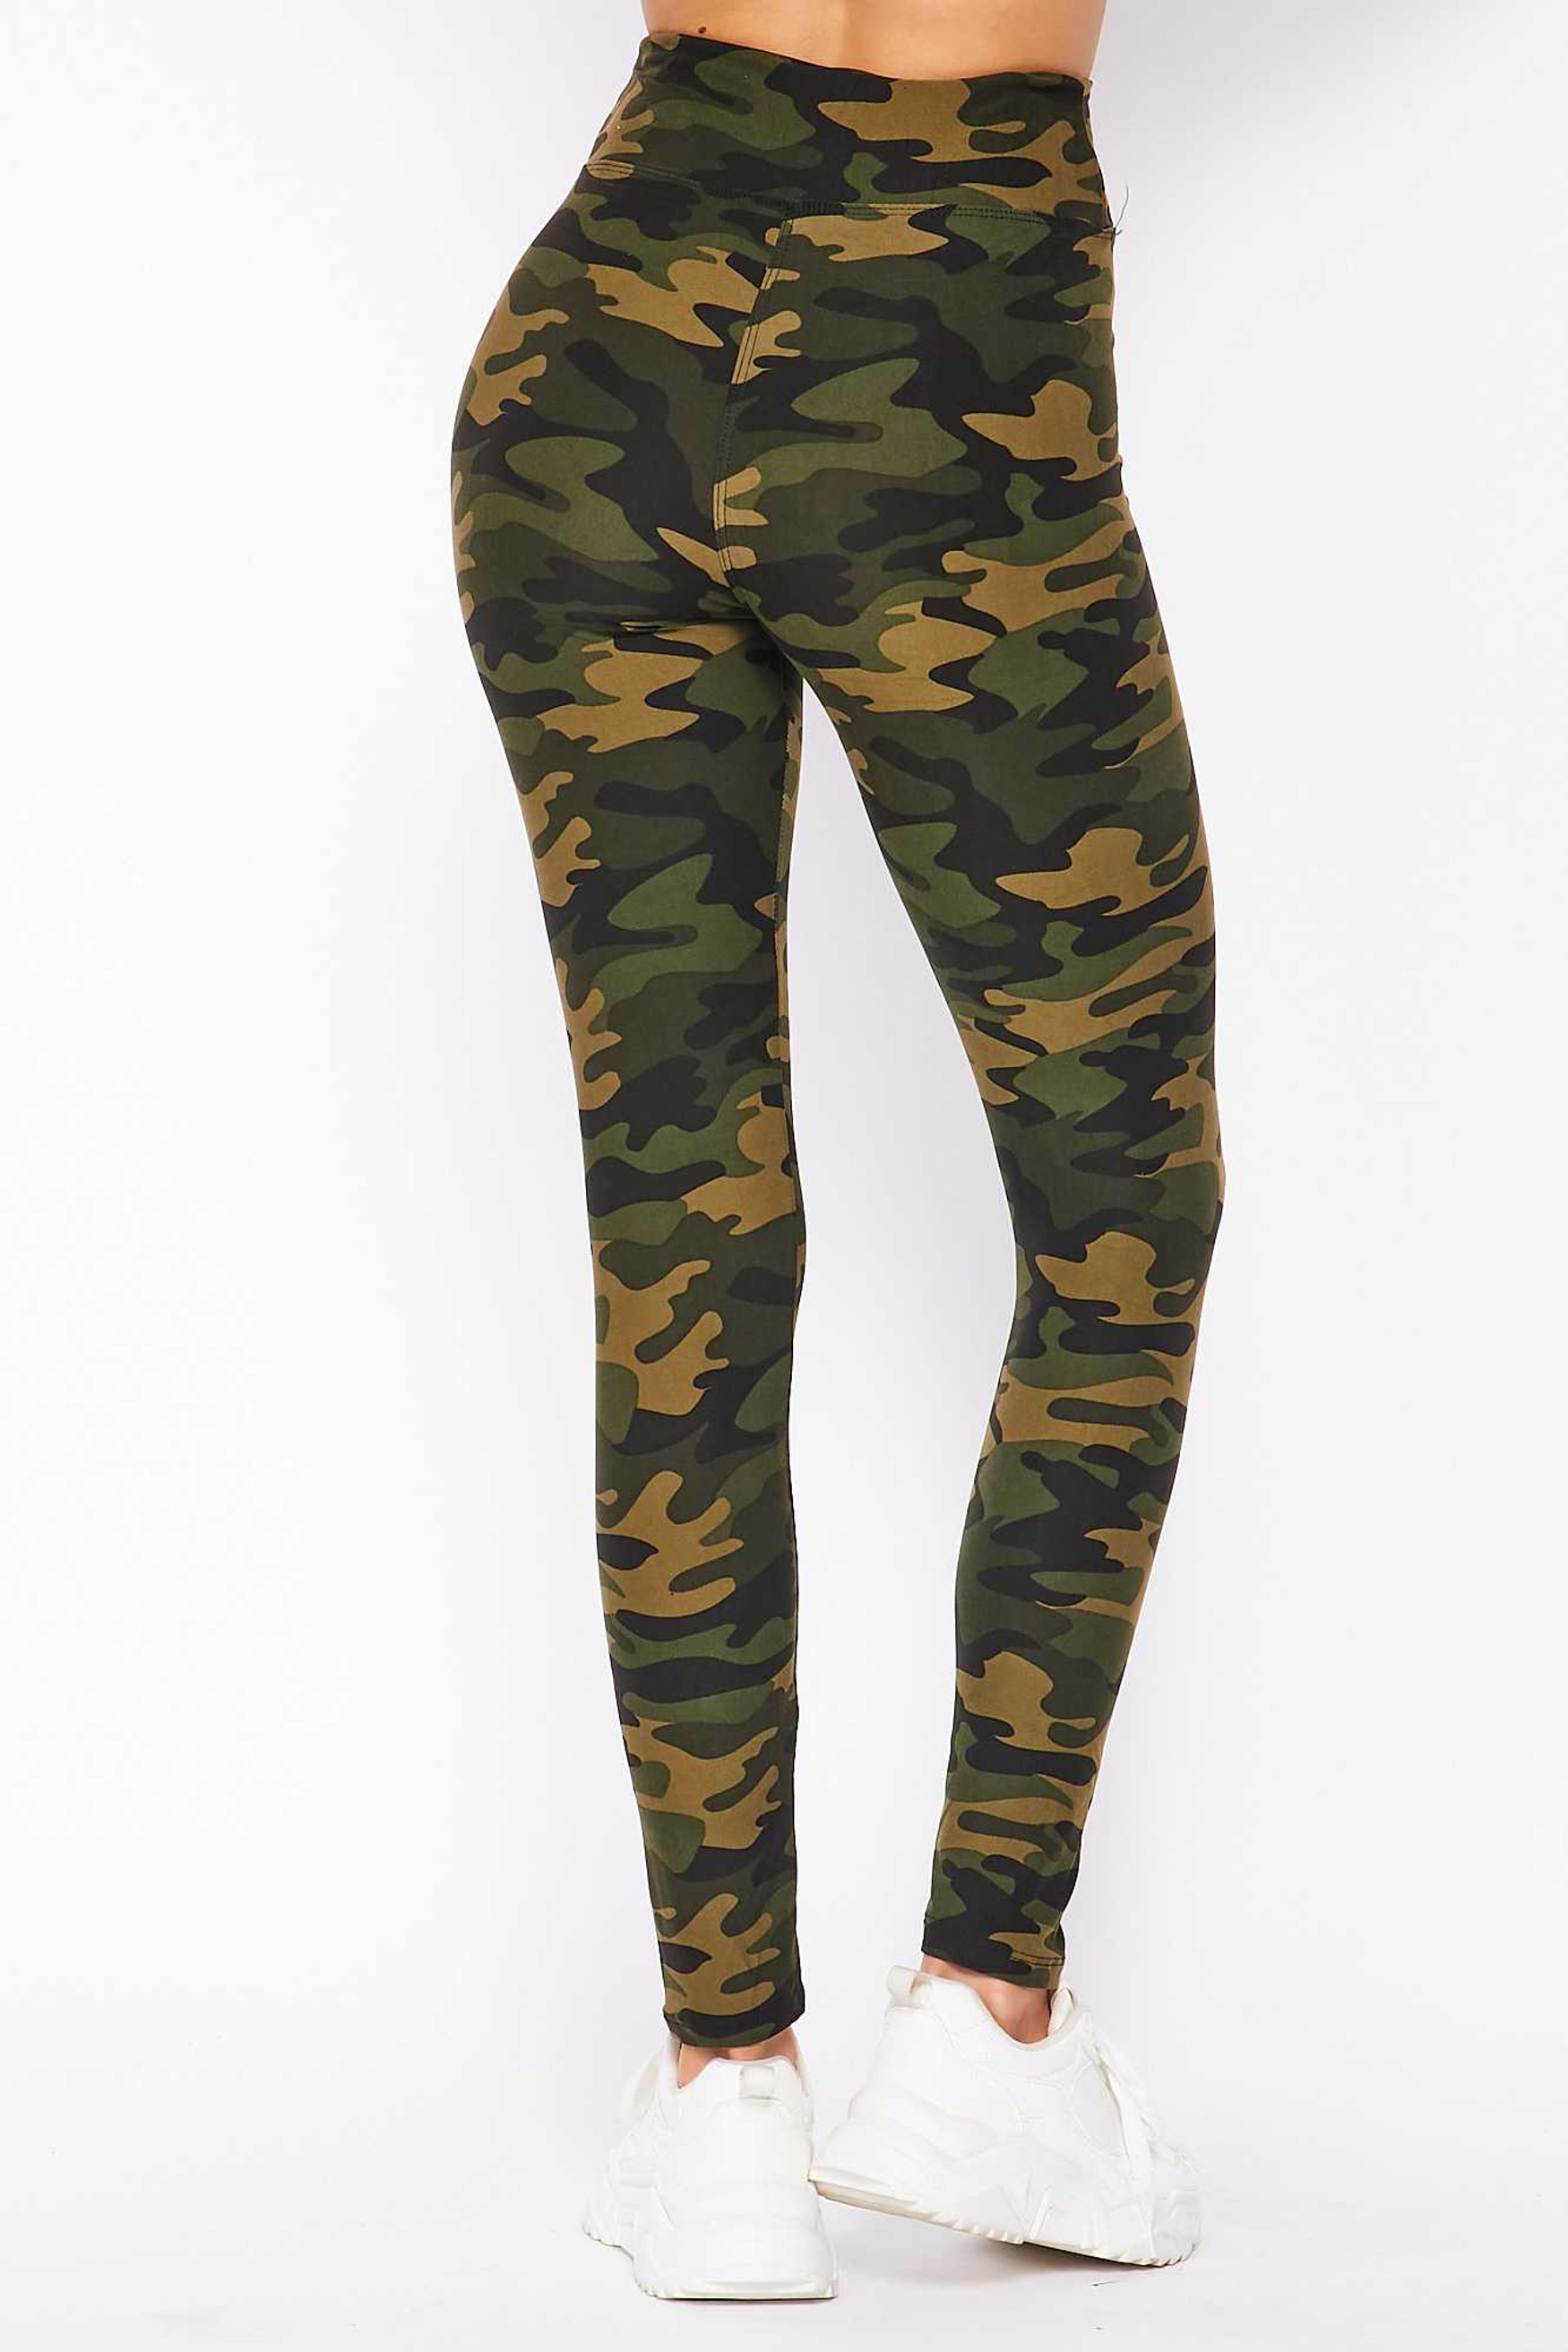 Buttery Soft Olive Green Camouflage High Waist Leggings